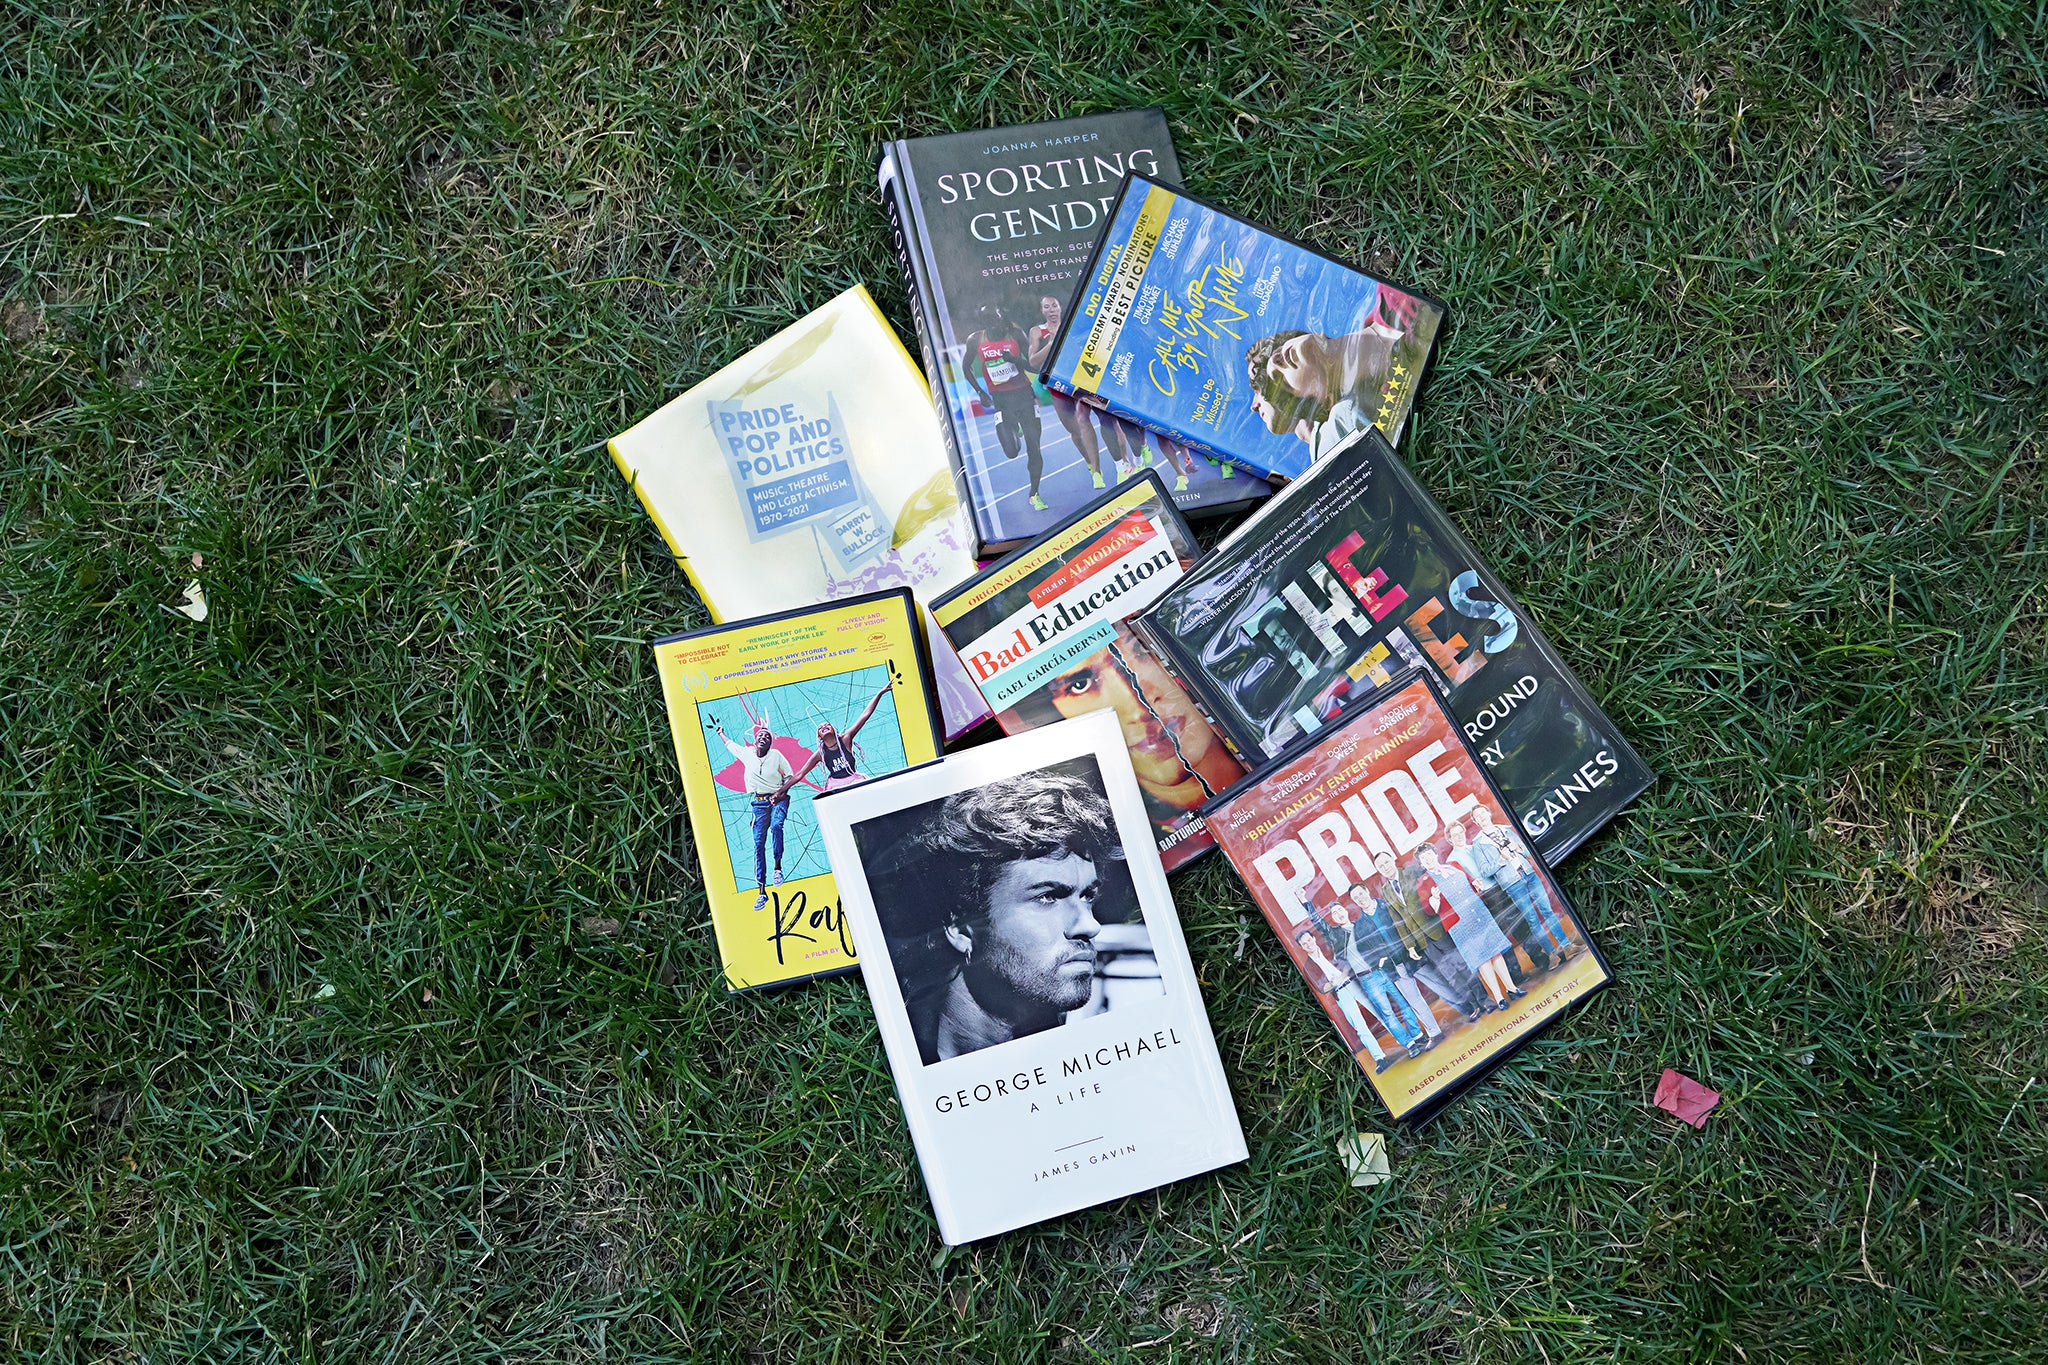 Books and DVDs are laid out in a circular pattern on grass with the DVD Bad Education in the center. Clockwise from the top are the book Sporting Gender, the DVD Call Me By Your Name, DVD Fifties, DVD Pride, book George Michael, DVD Rafiki, and book Pride, Pop and Politics.